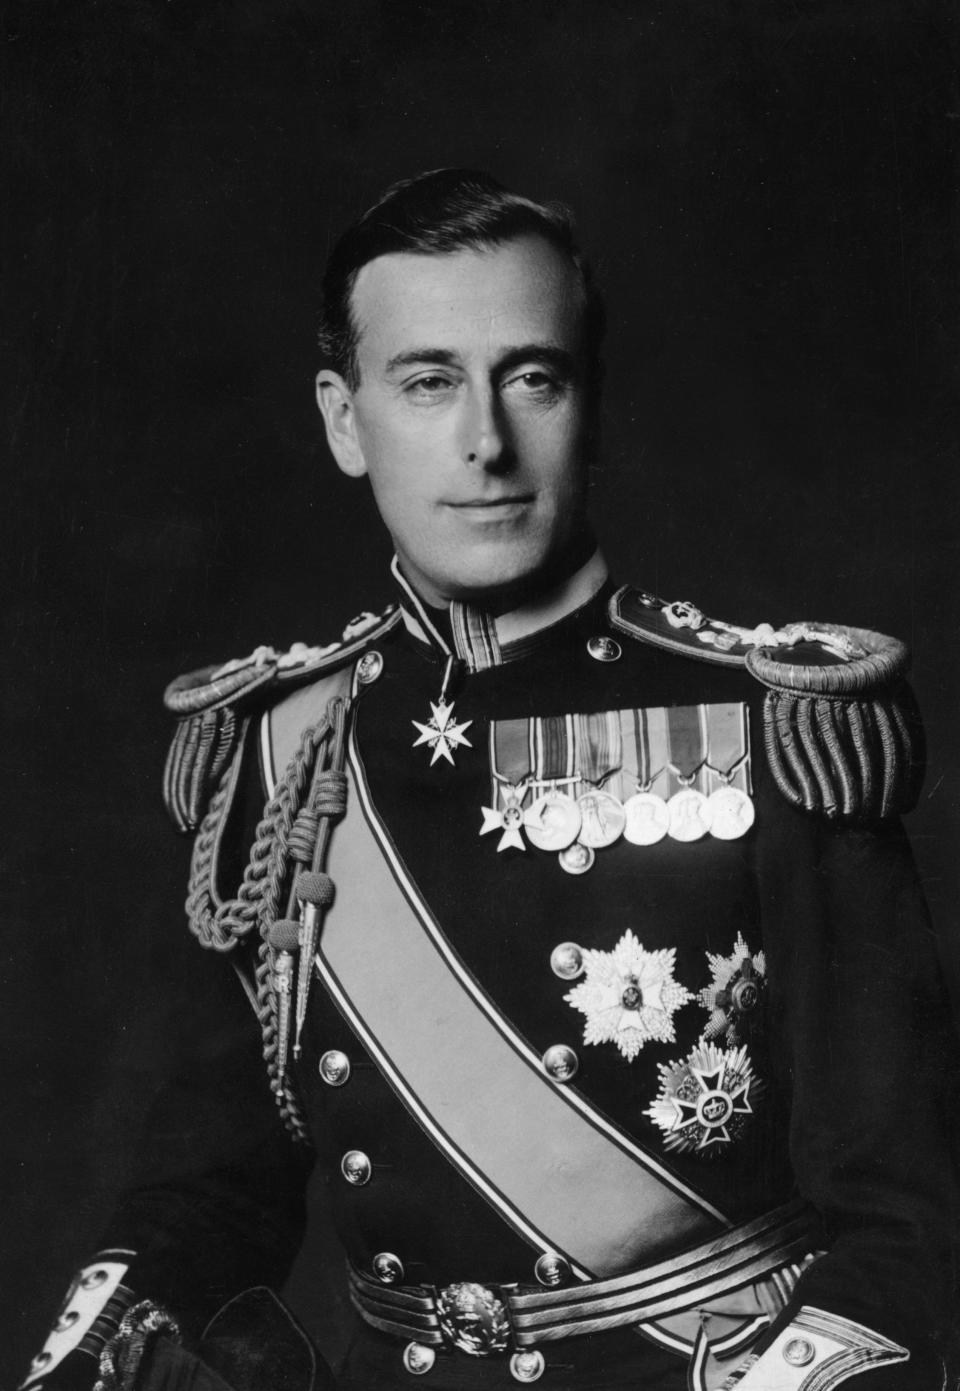 14th April 1942:  British naval officer Captain Lord Louis Mountbatten (1900 - 1979), the new chief of Combined Operations during World War II, with the acting rank of vice-admiral.  (Photo by Walter Stoneman/Hulton Archive/Getty Images)